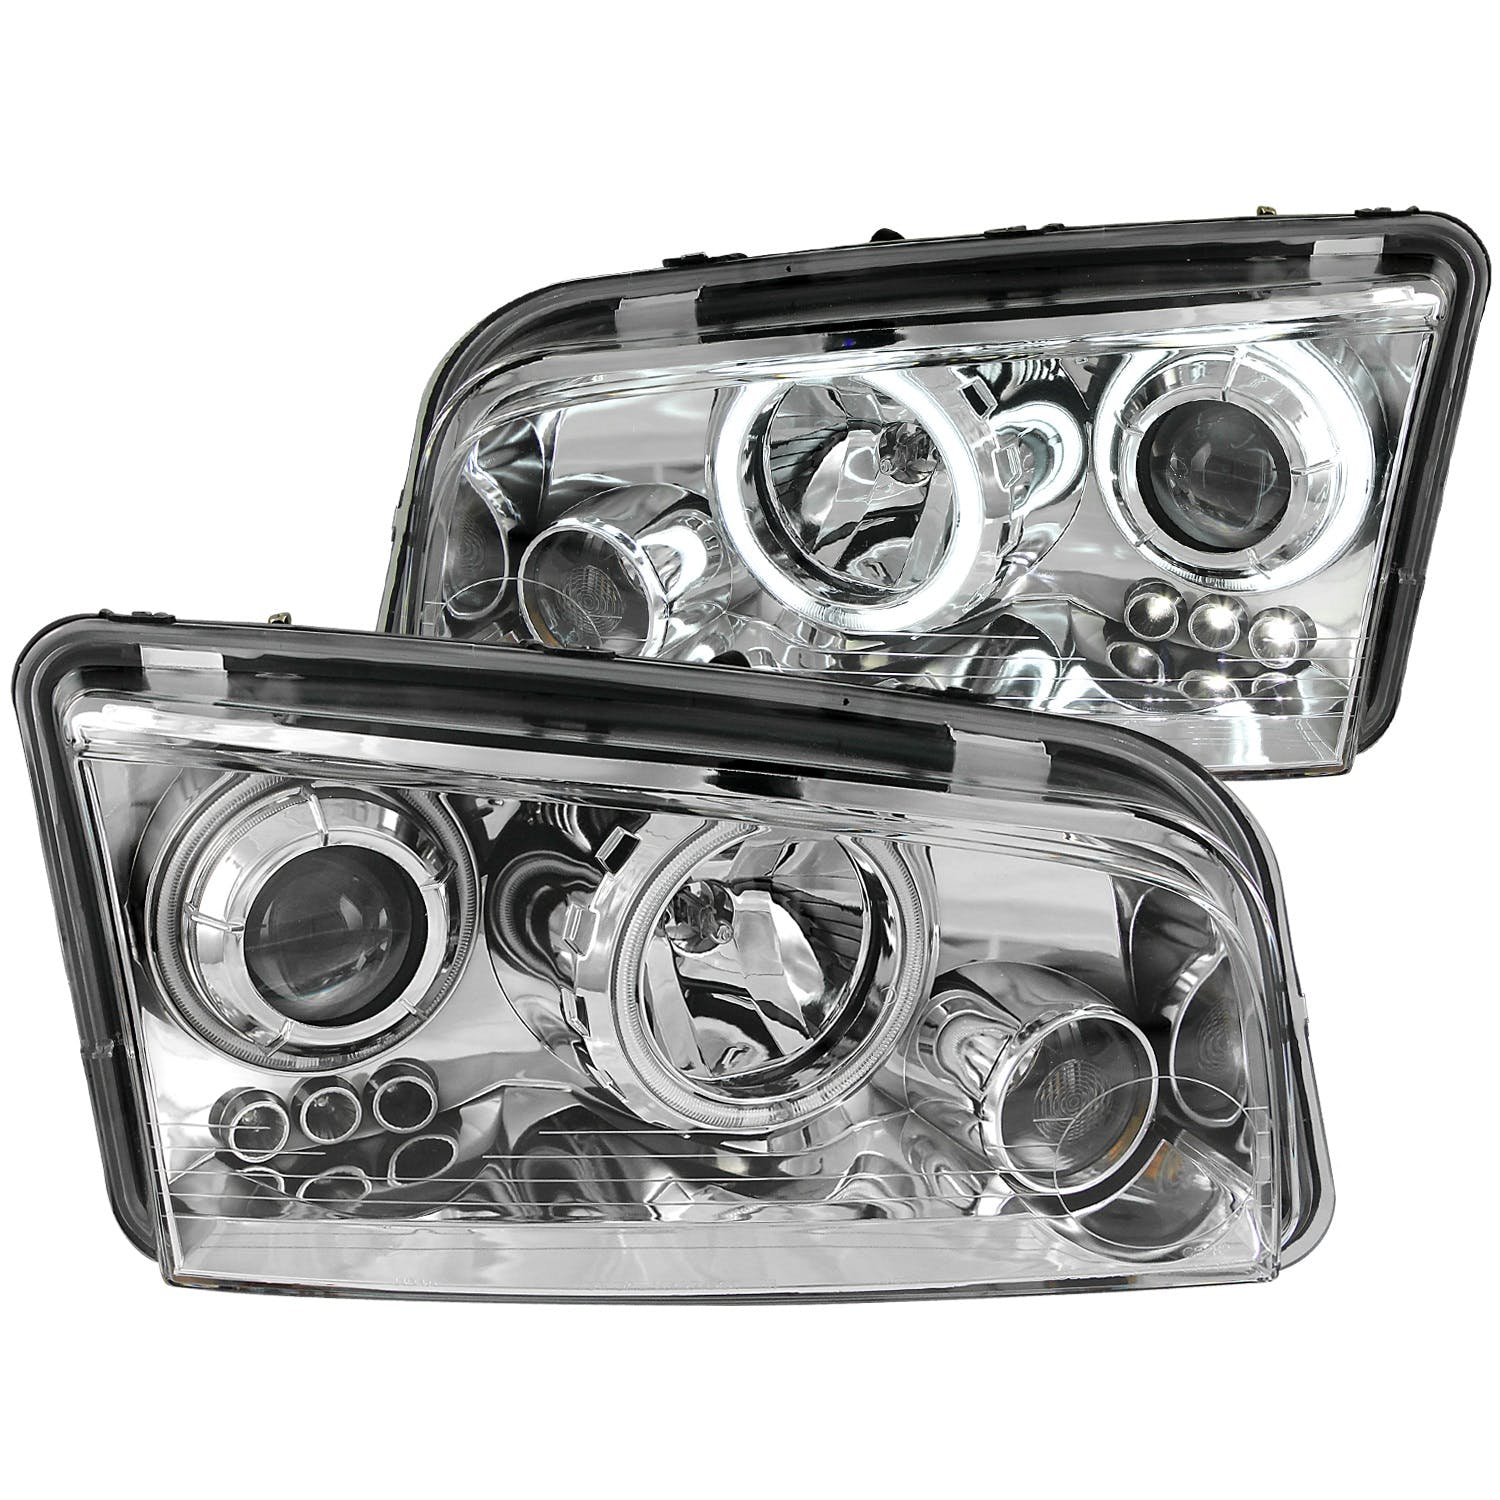 AnzoUSA 121382 Projector Headlights with Halo Chrome